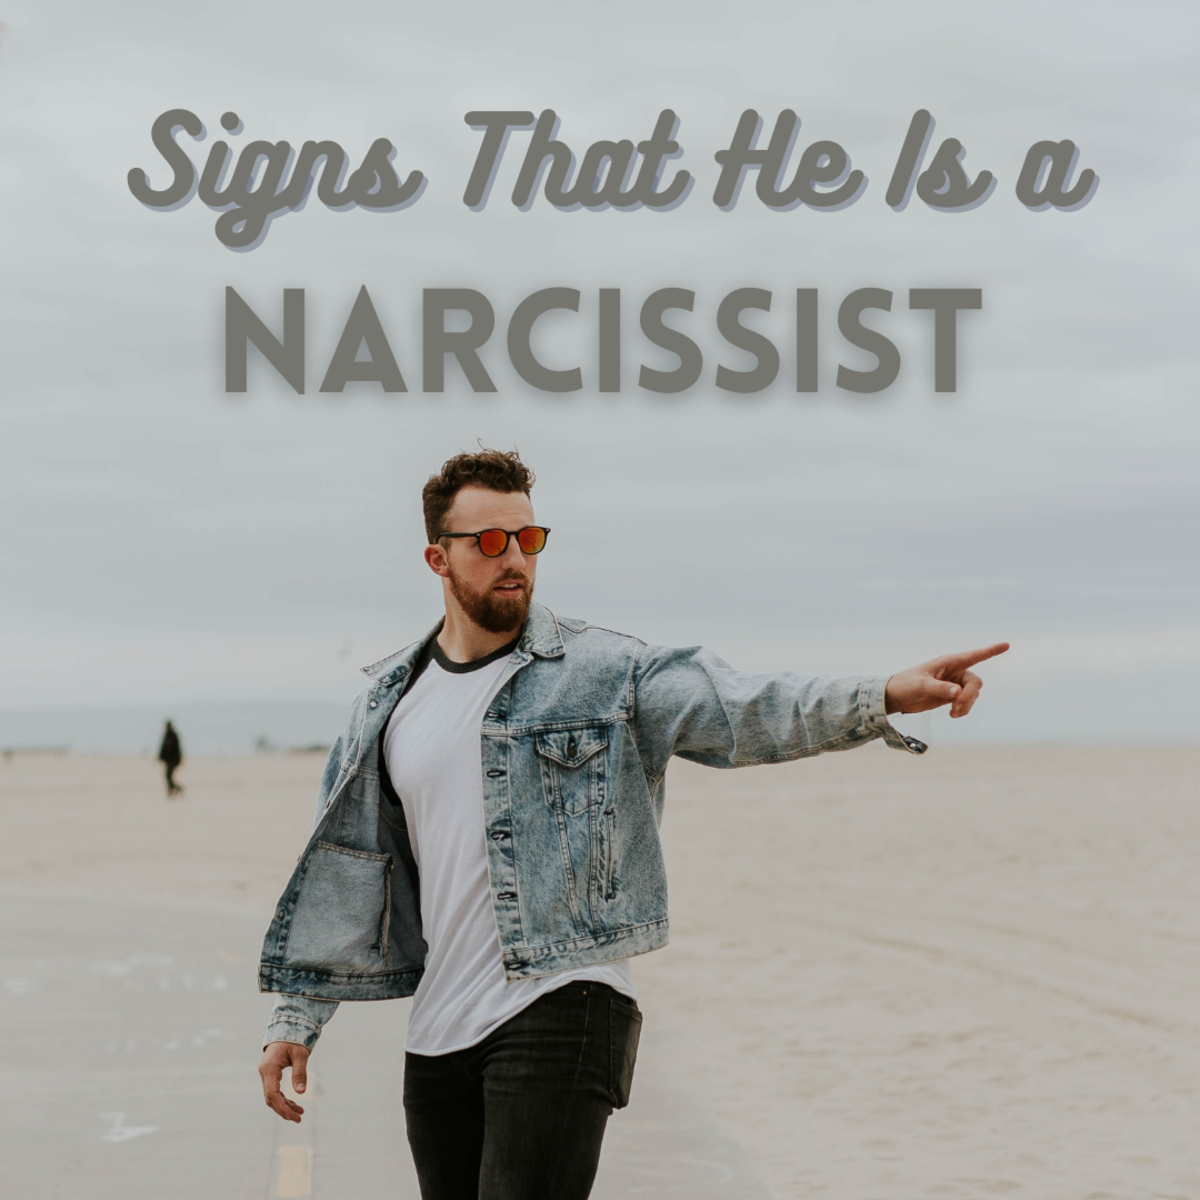 25 Signs Your Man Is a Narcissist